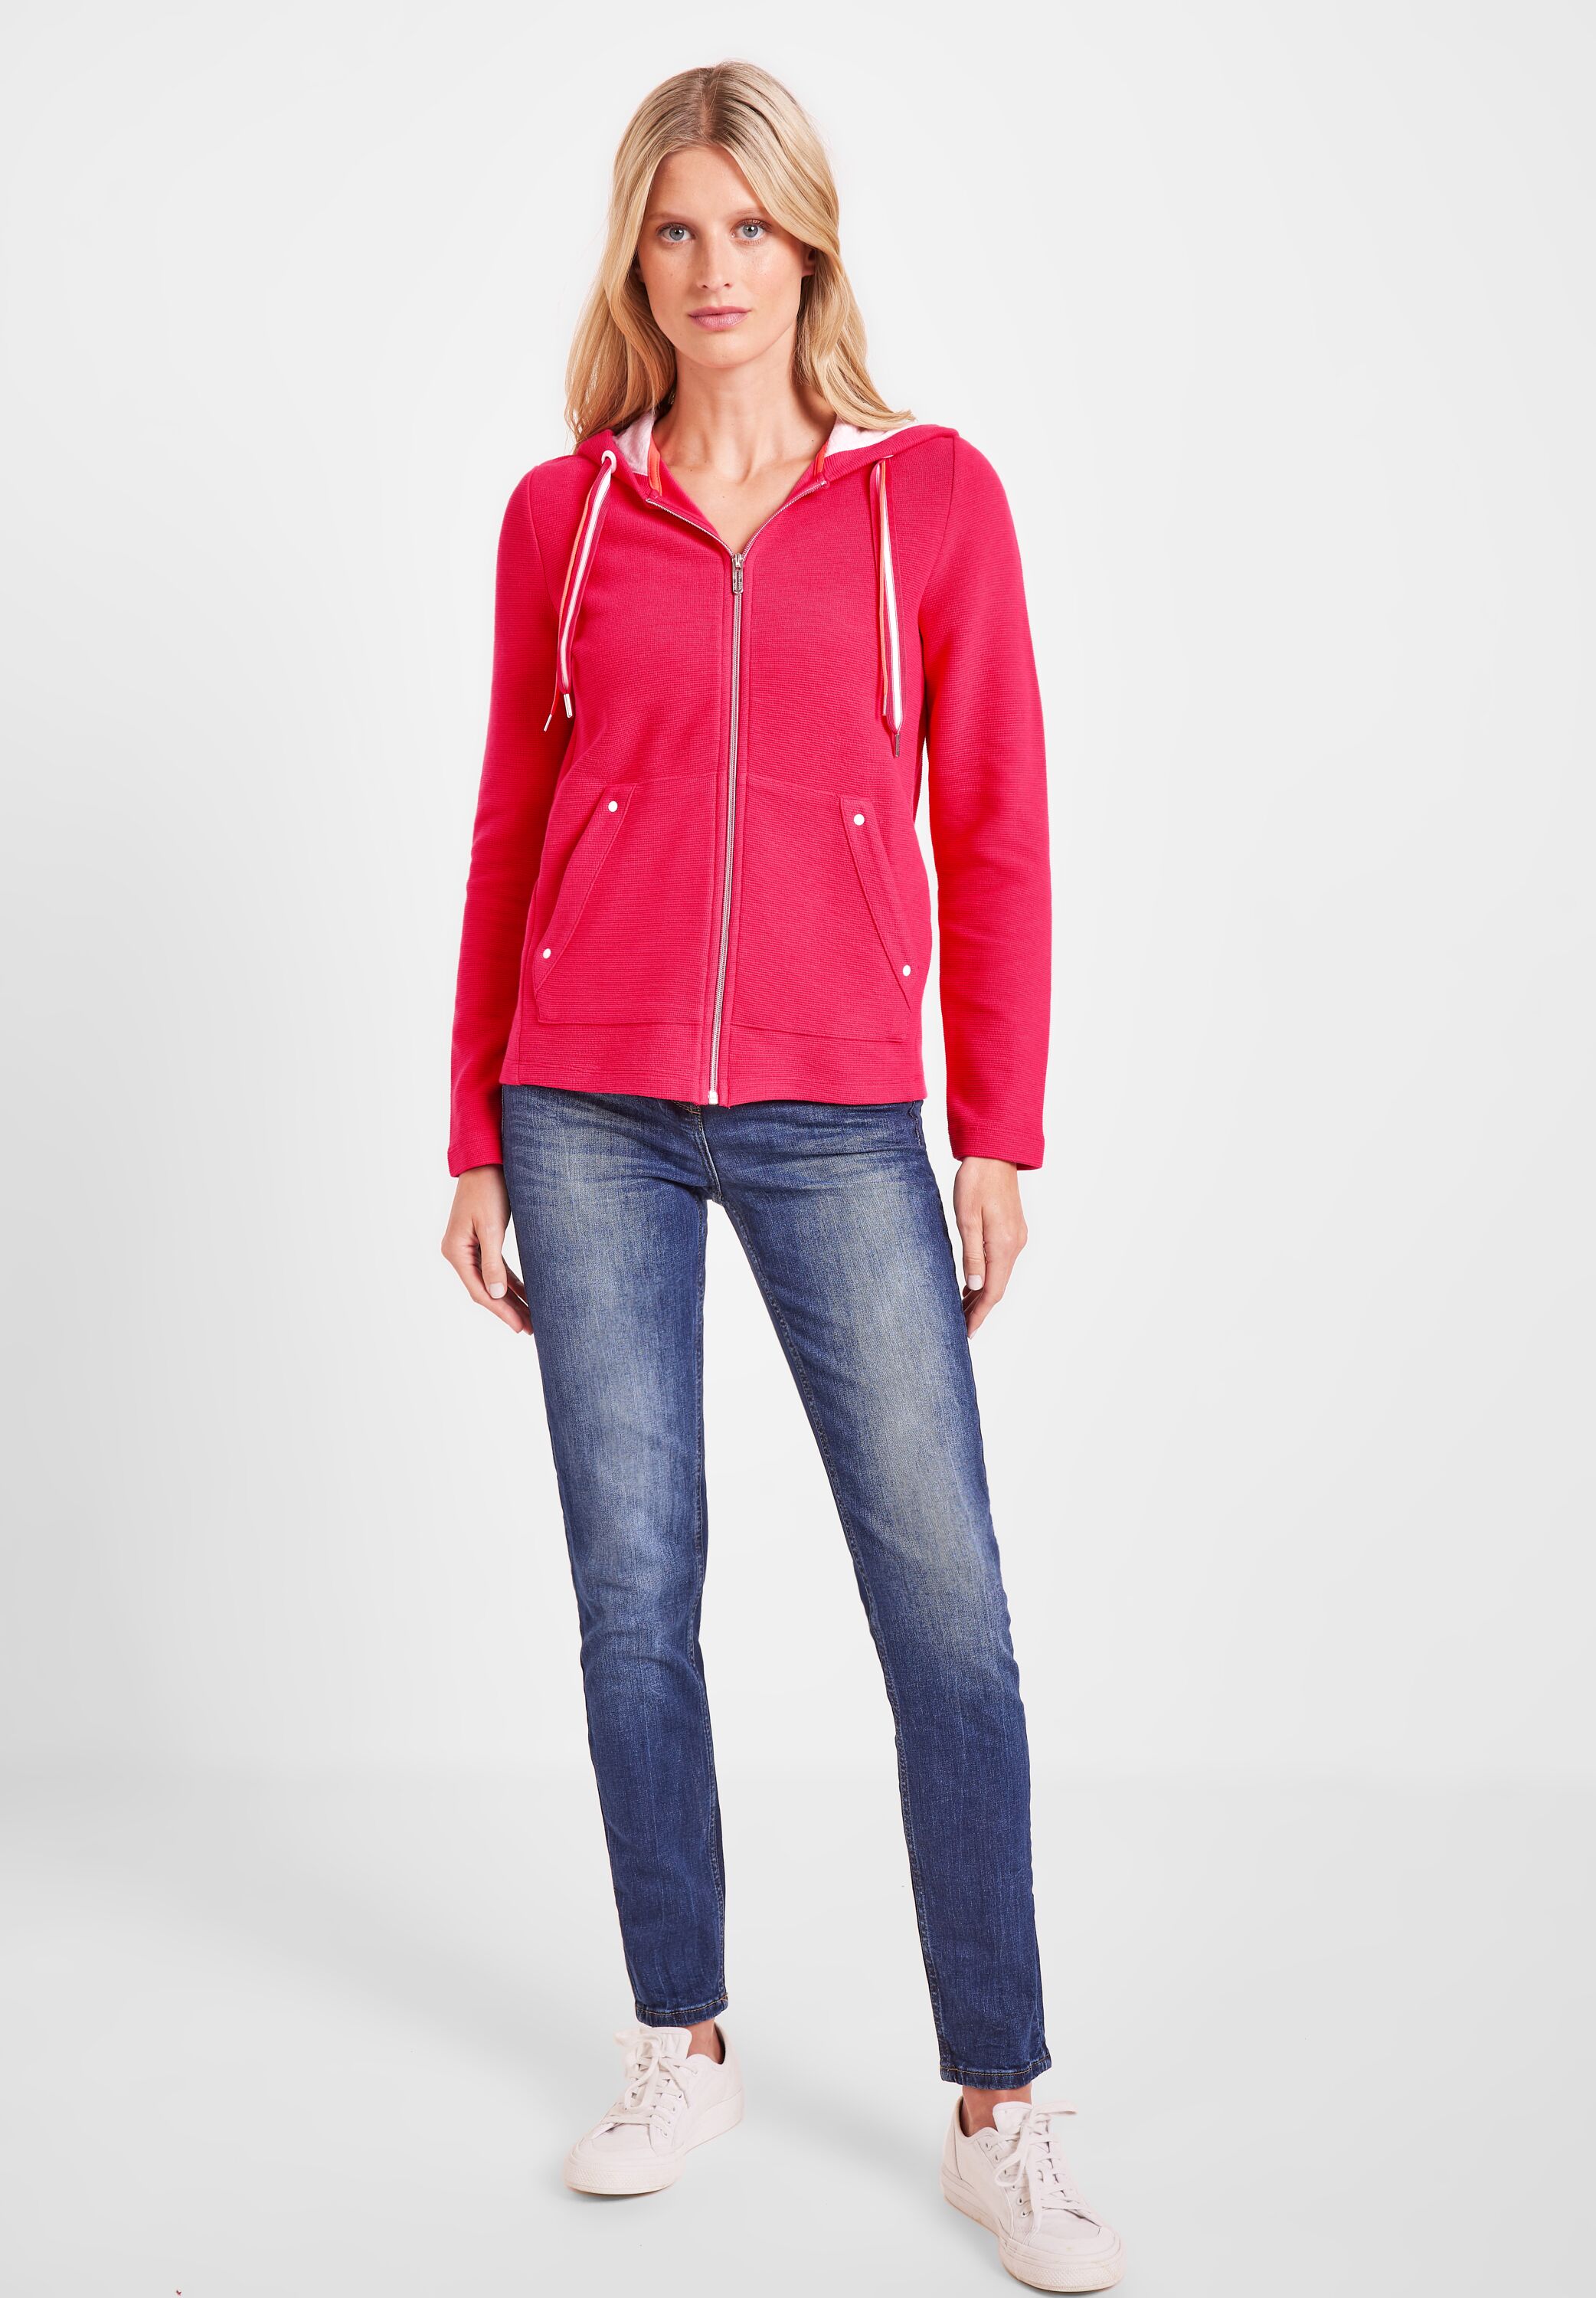 CECIL Shirtjacke in Strawberry SALE Mode reduziert B319398-14472 im Red - CONCEPT